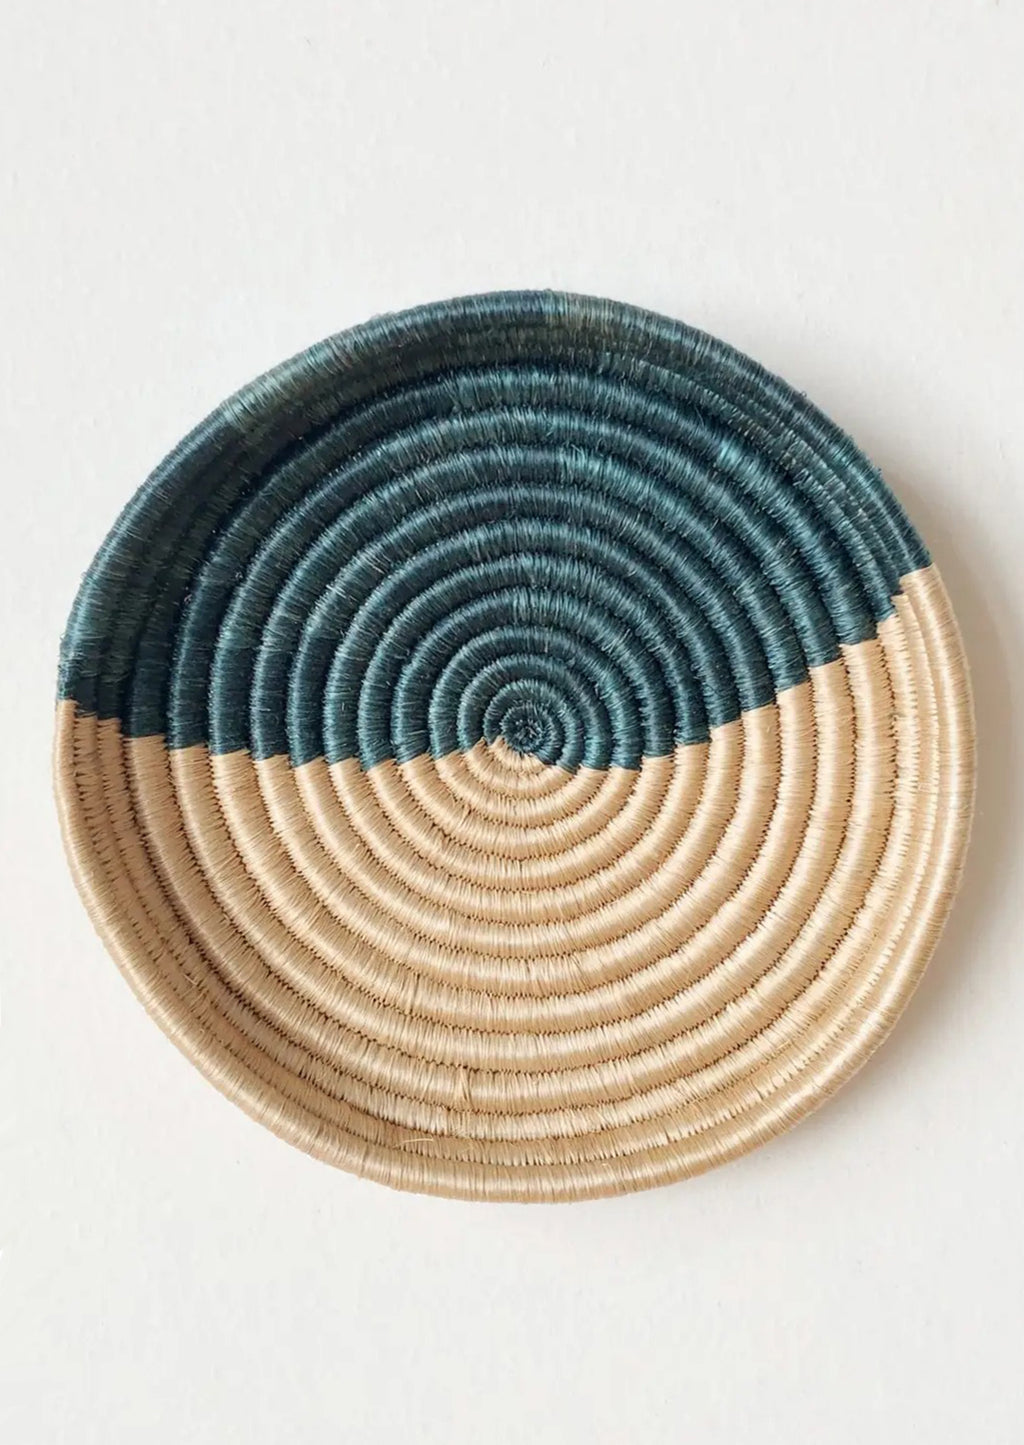 Lagoon / Beige: A round, shallow sweetgrass tray in beige and teal.